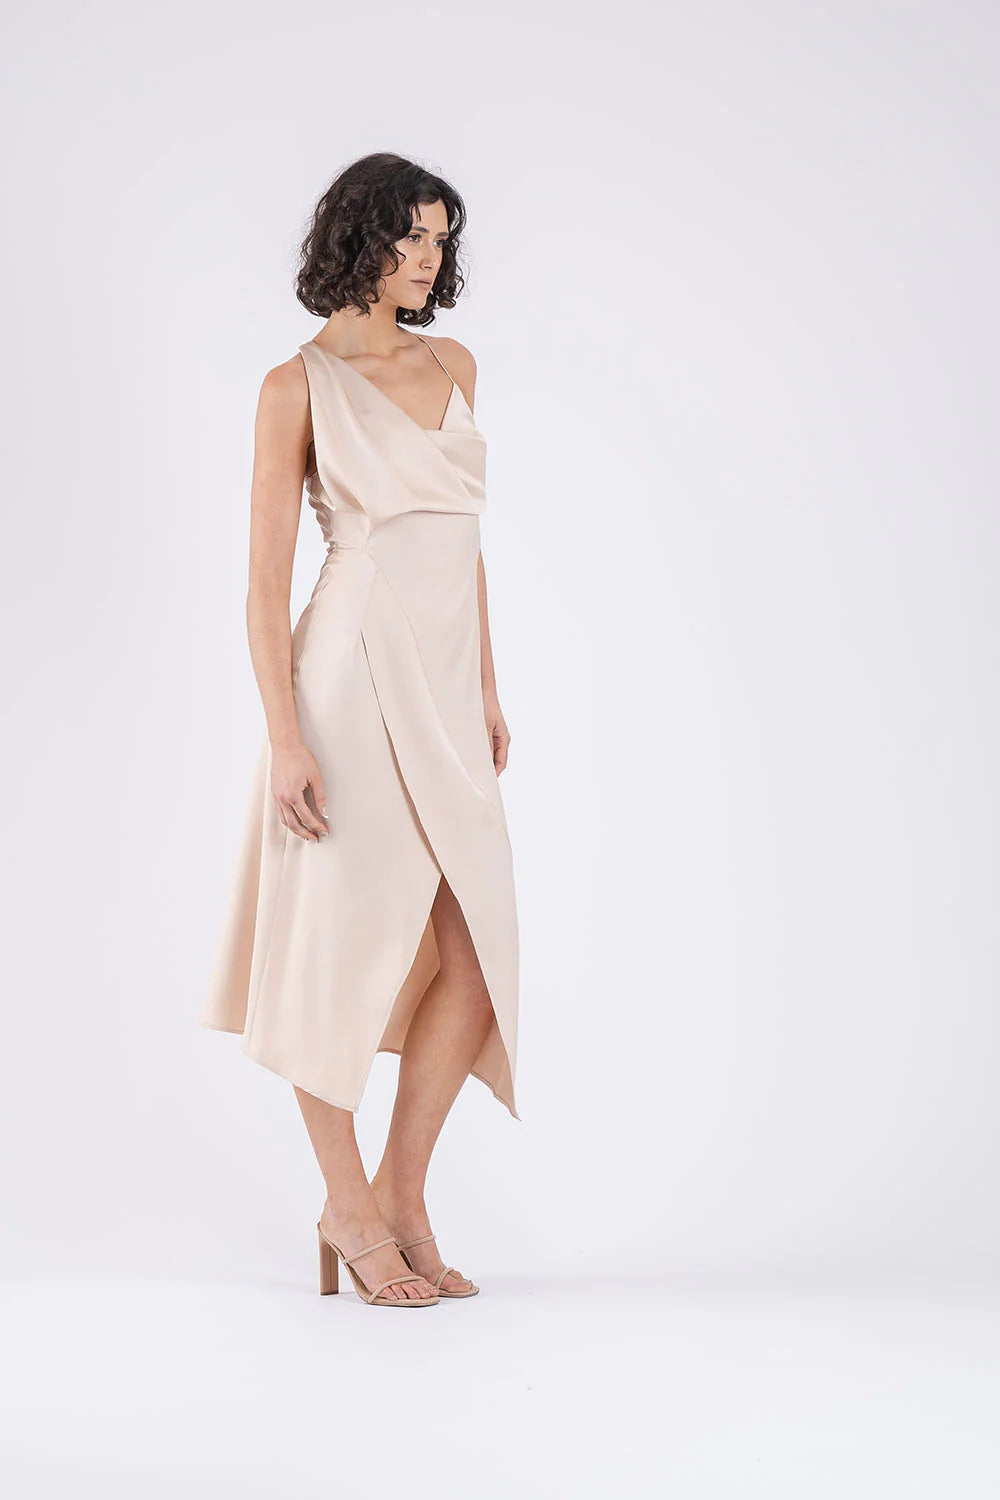 One Fell Swoop Muse Dress, Magnolia